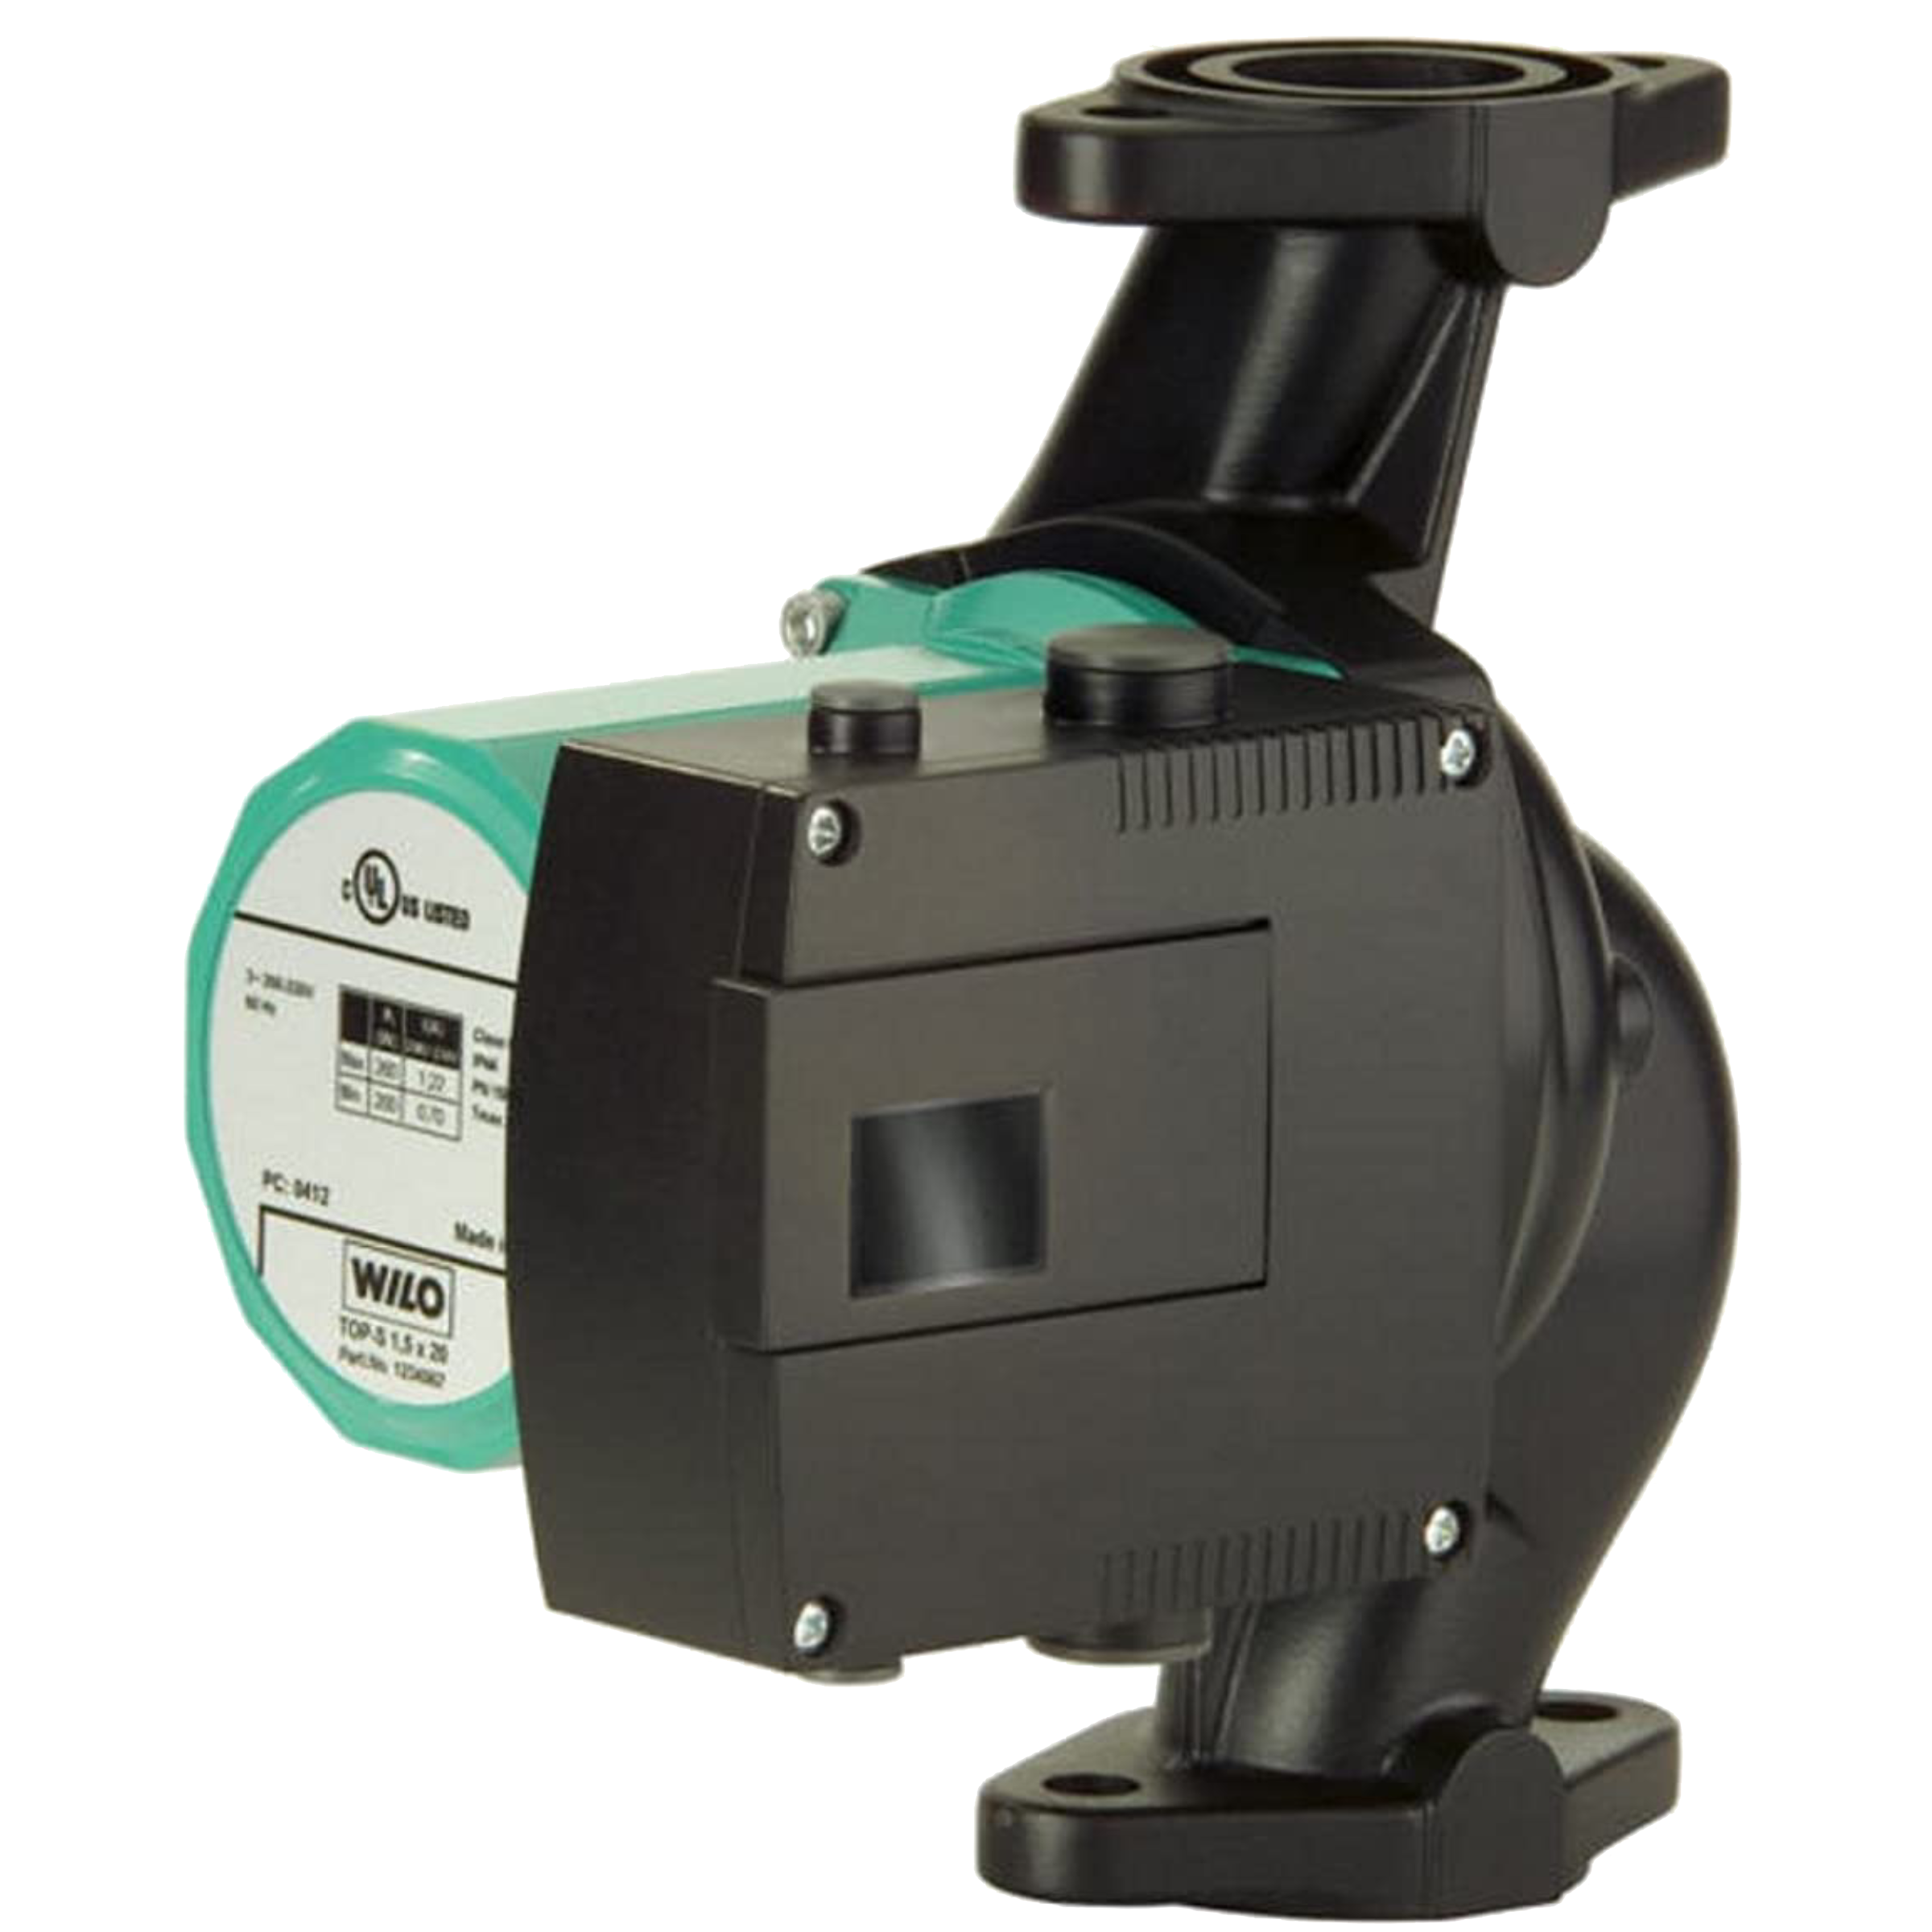 Top S 1.25x35 Wilo Top S Series 2-Speed Residential Circulating Pump, 1/4 HP, Max Flow 48 USGPM, 145 psi, 115V/60Hz/1Ph